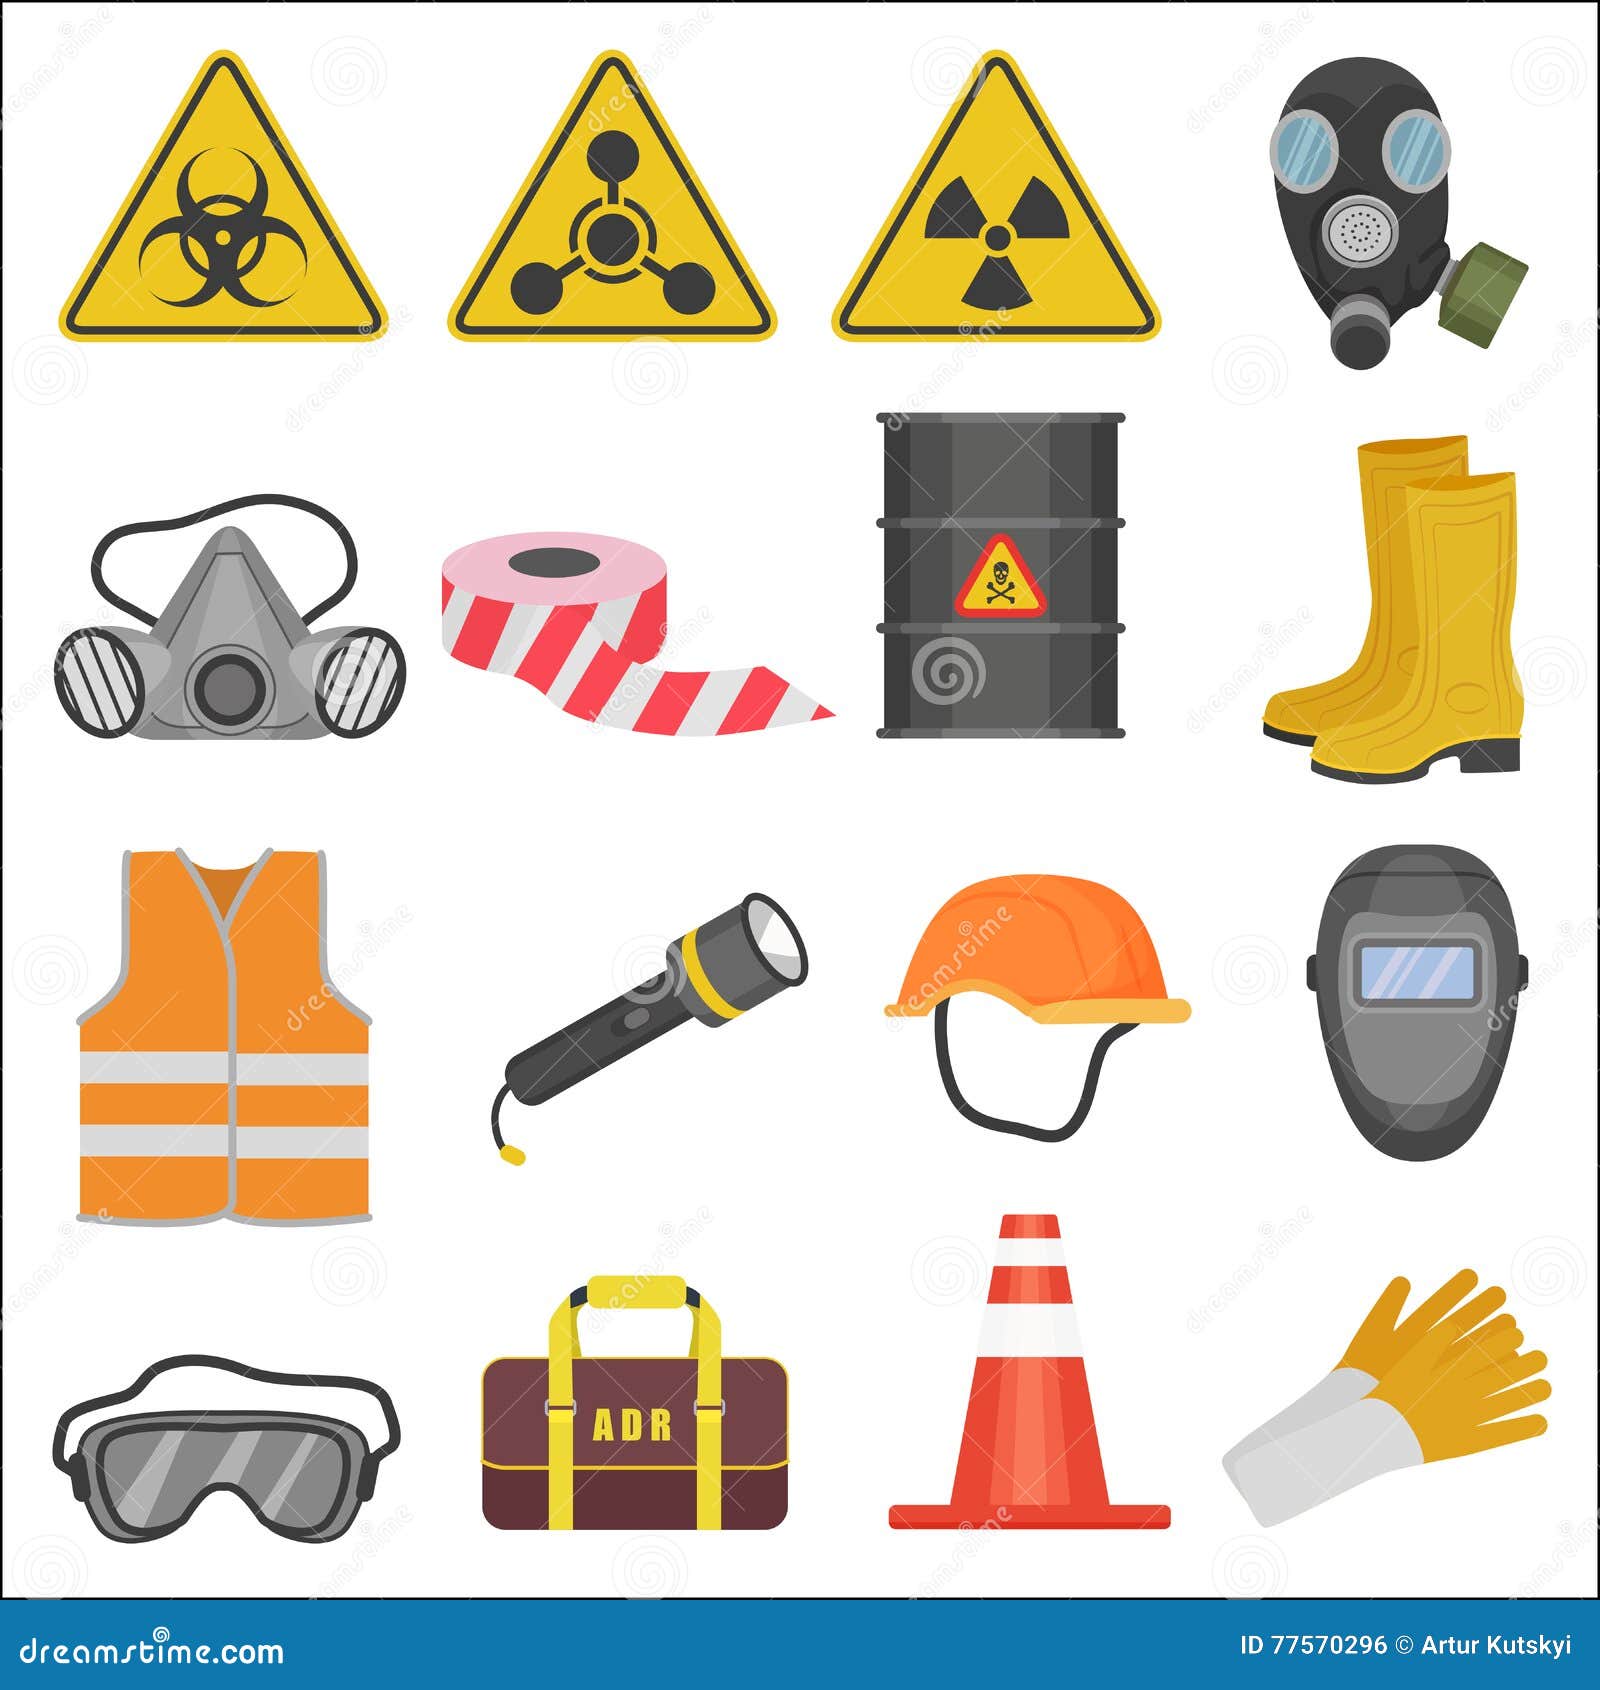 52 Laboratory Safety Symbols, Signs, and Meanings